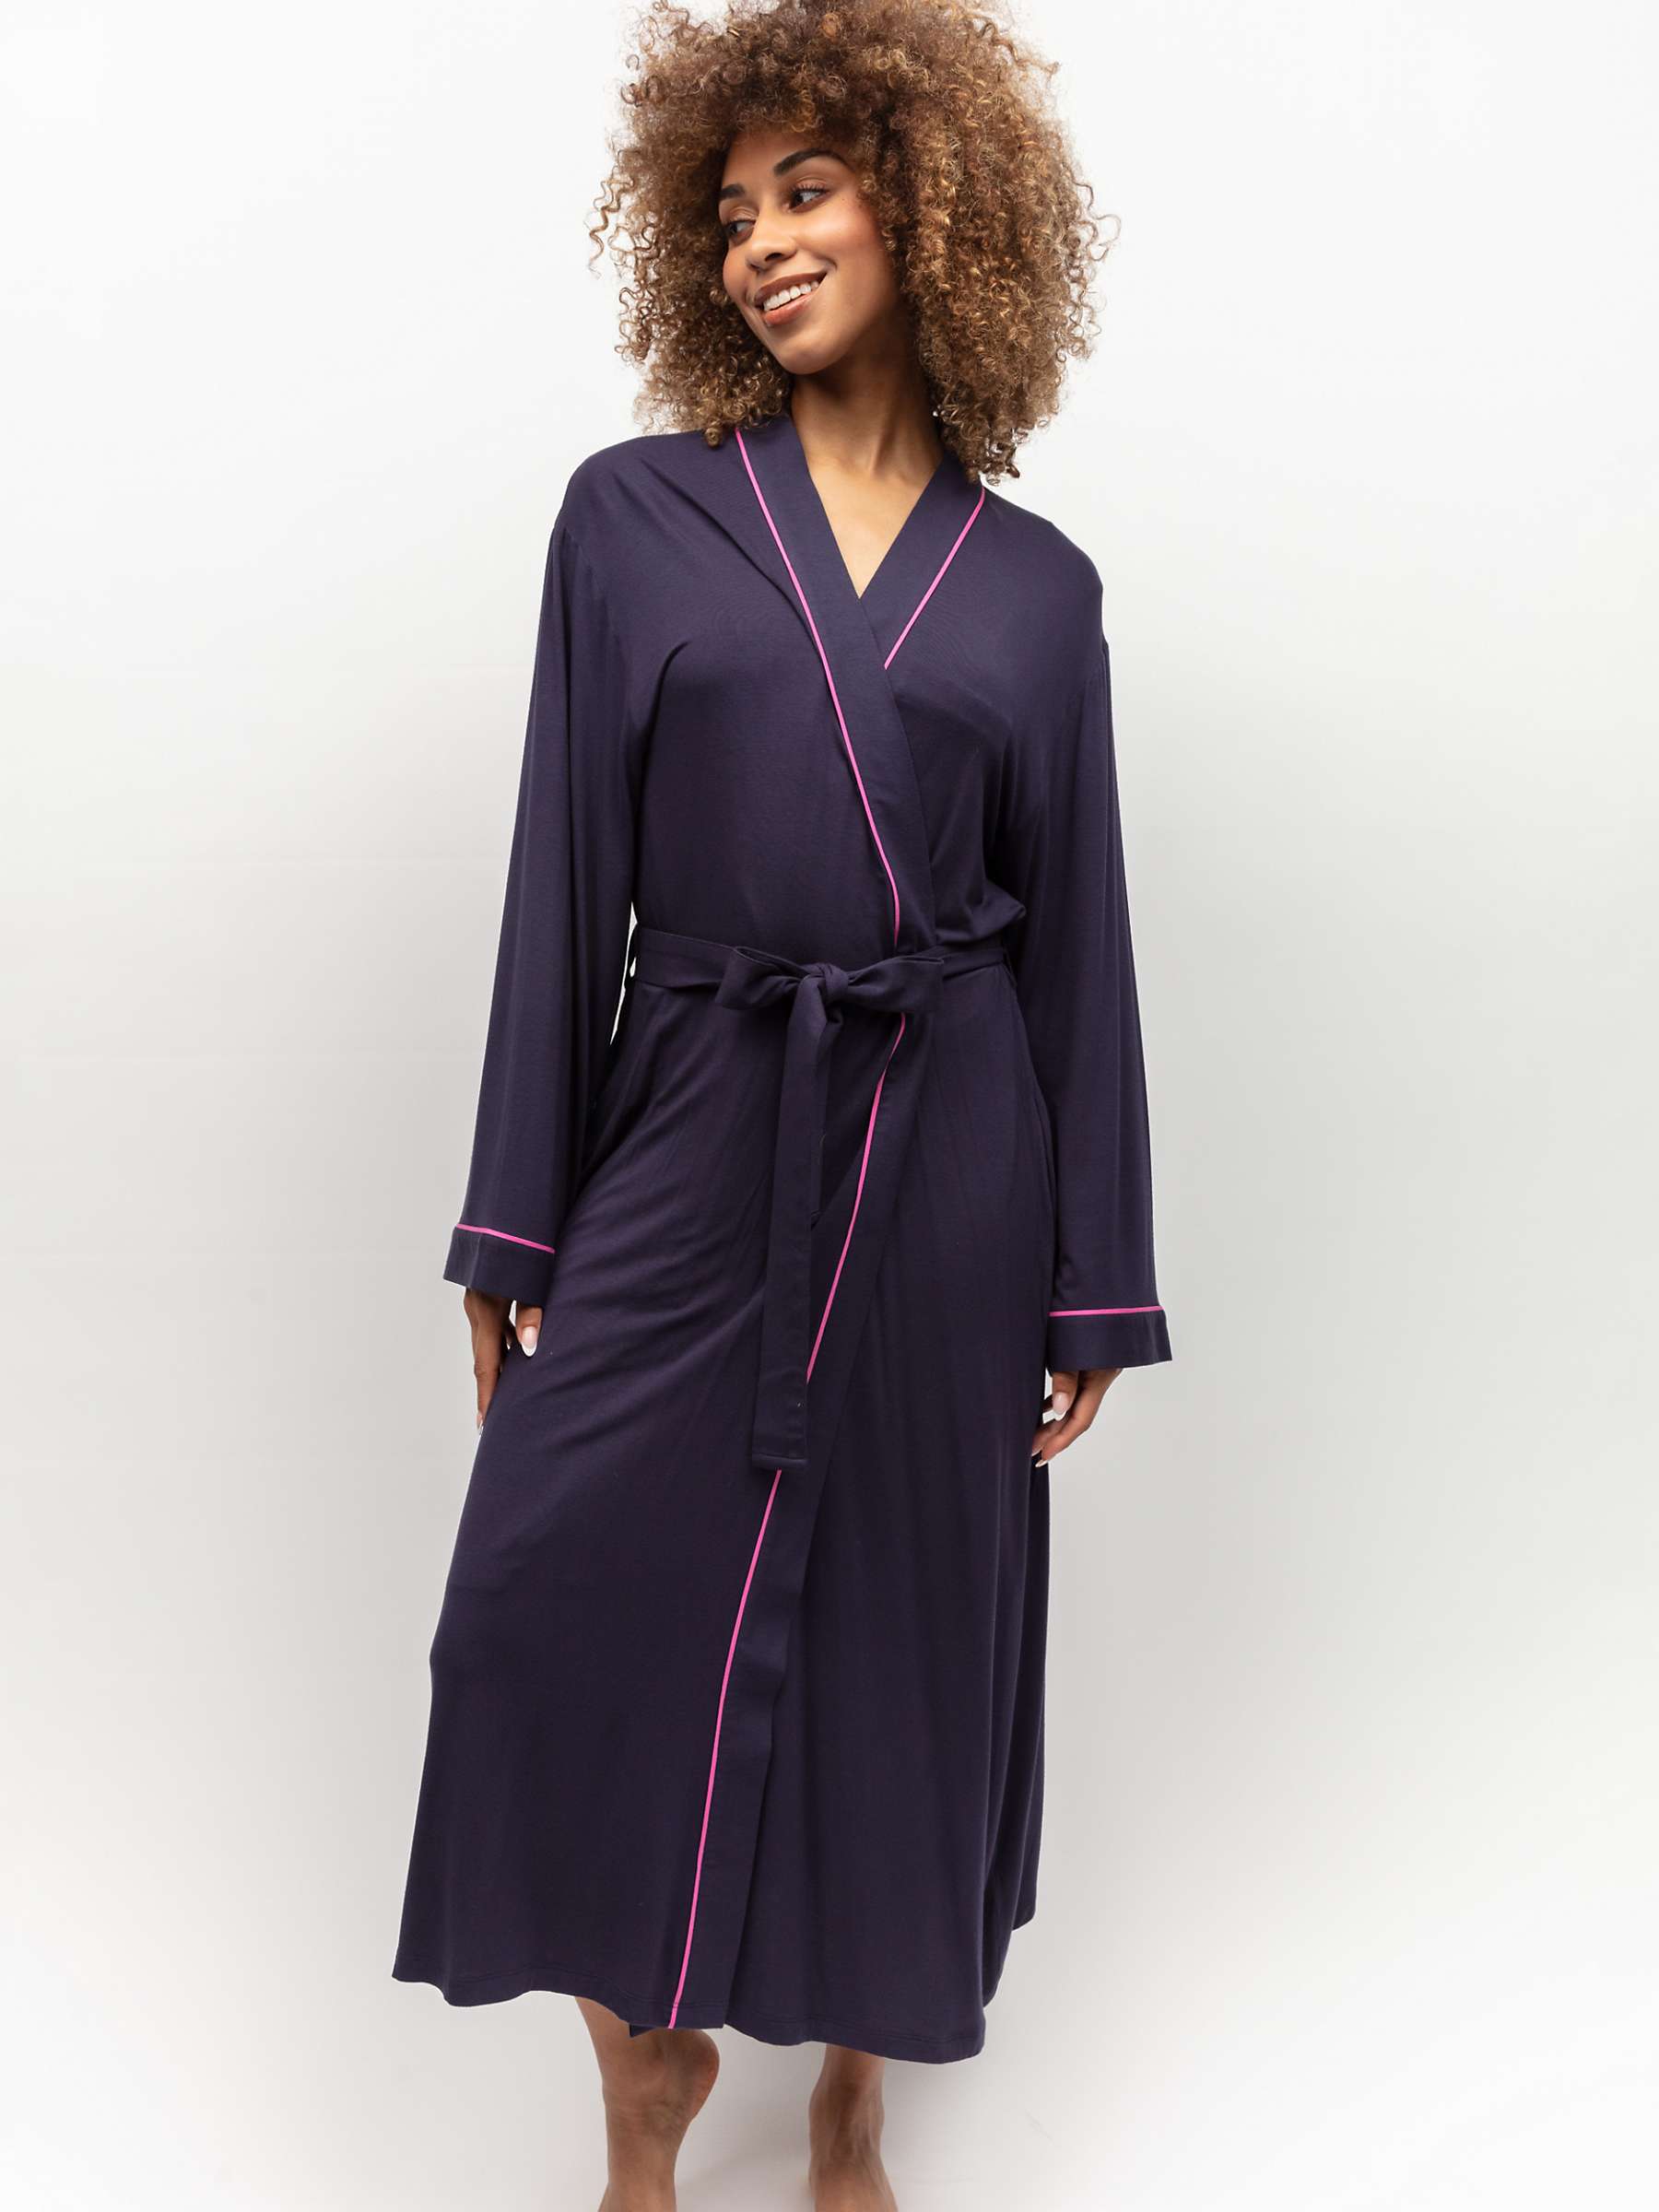 Buy Cyberjammies Avery Piped Jersey Dressing Gown Online at johnlewis.com